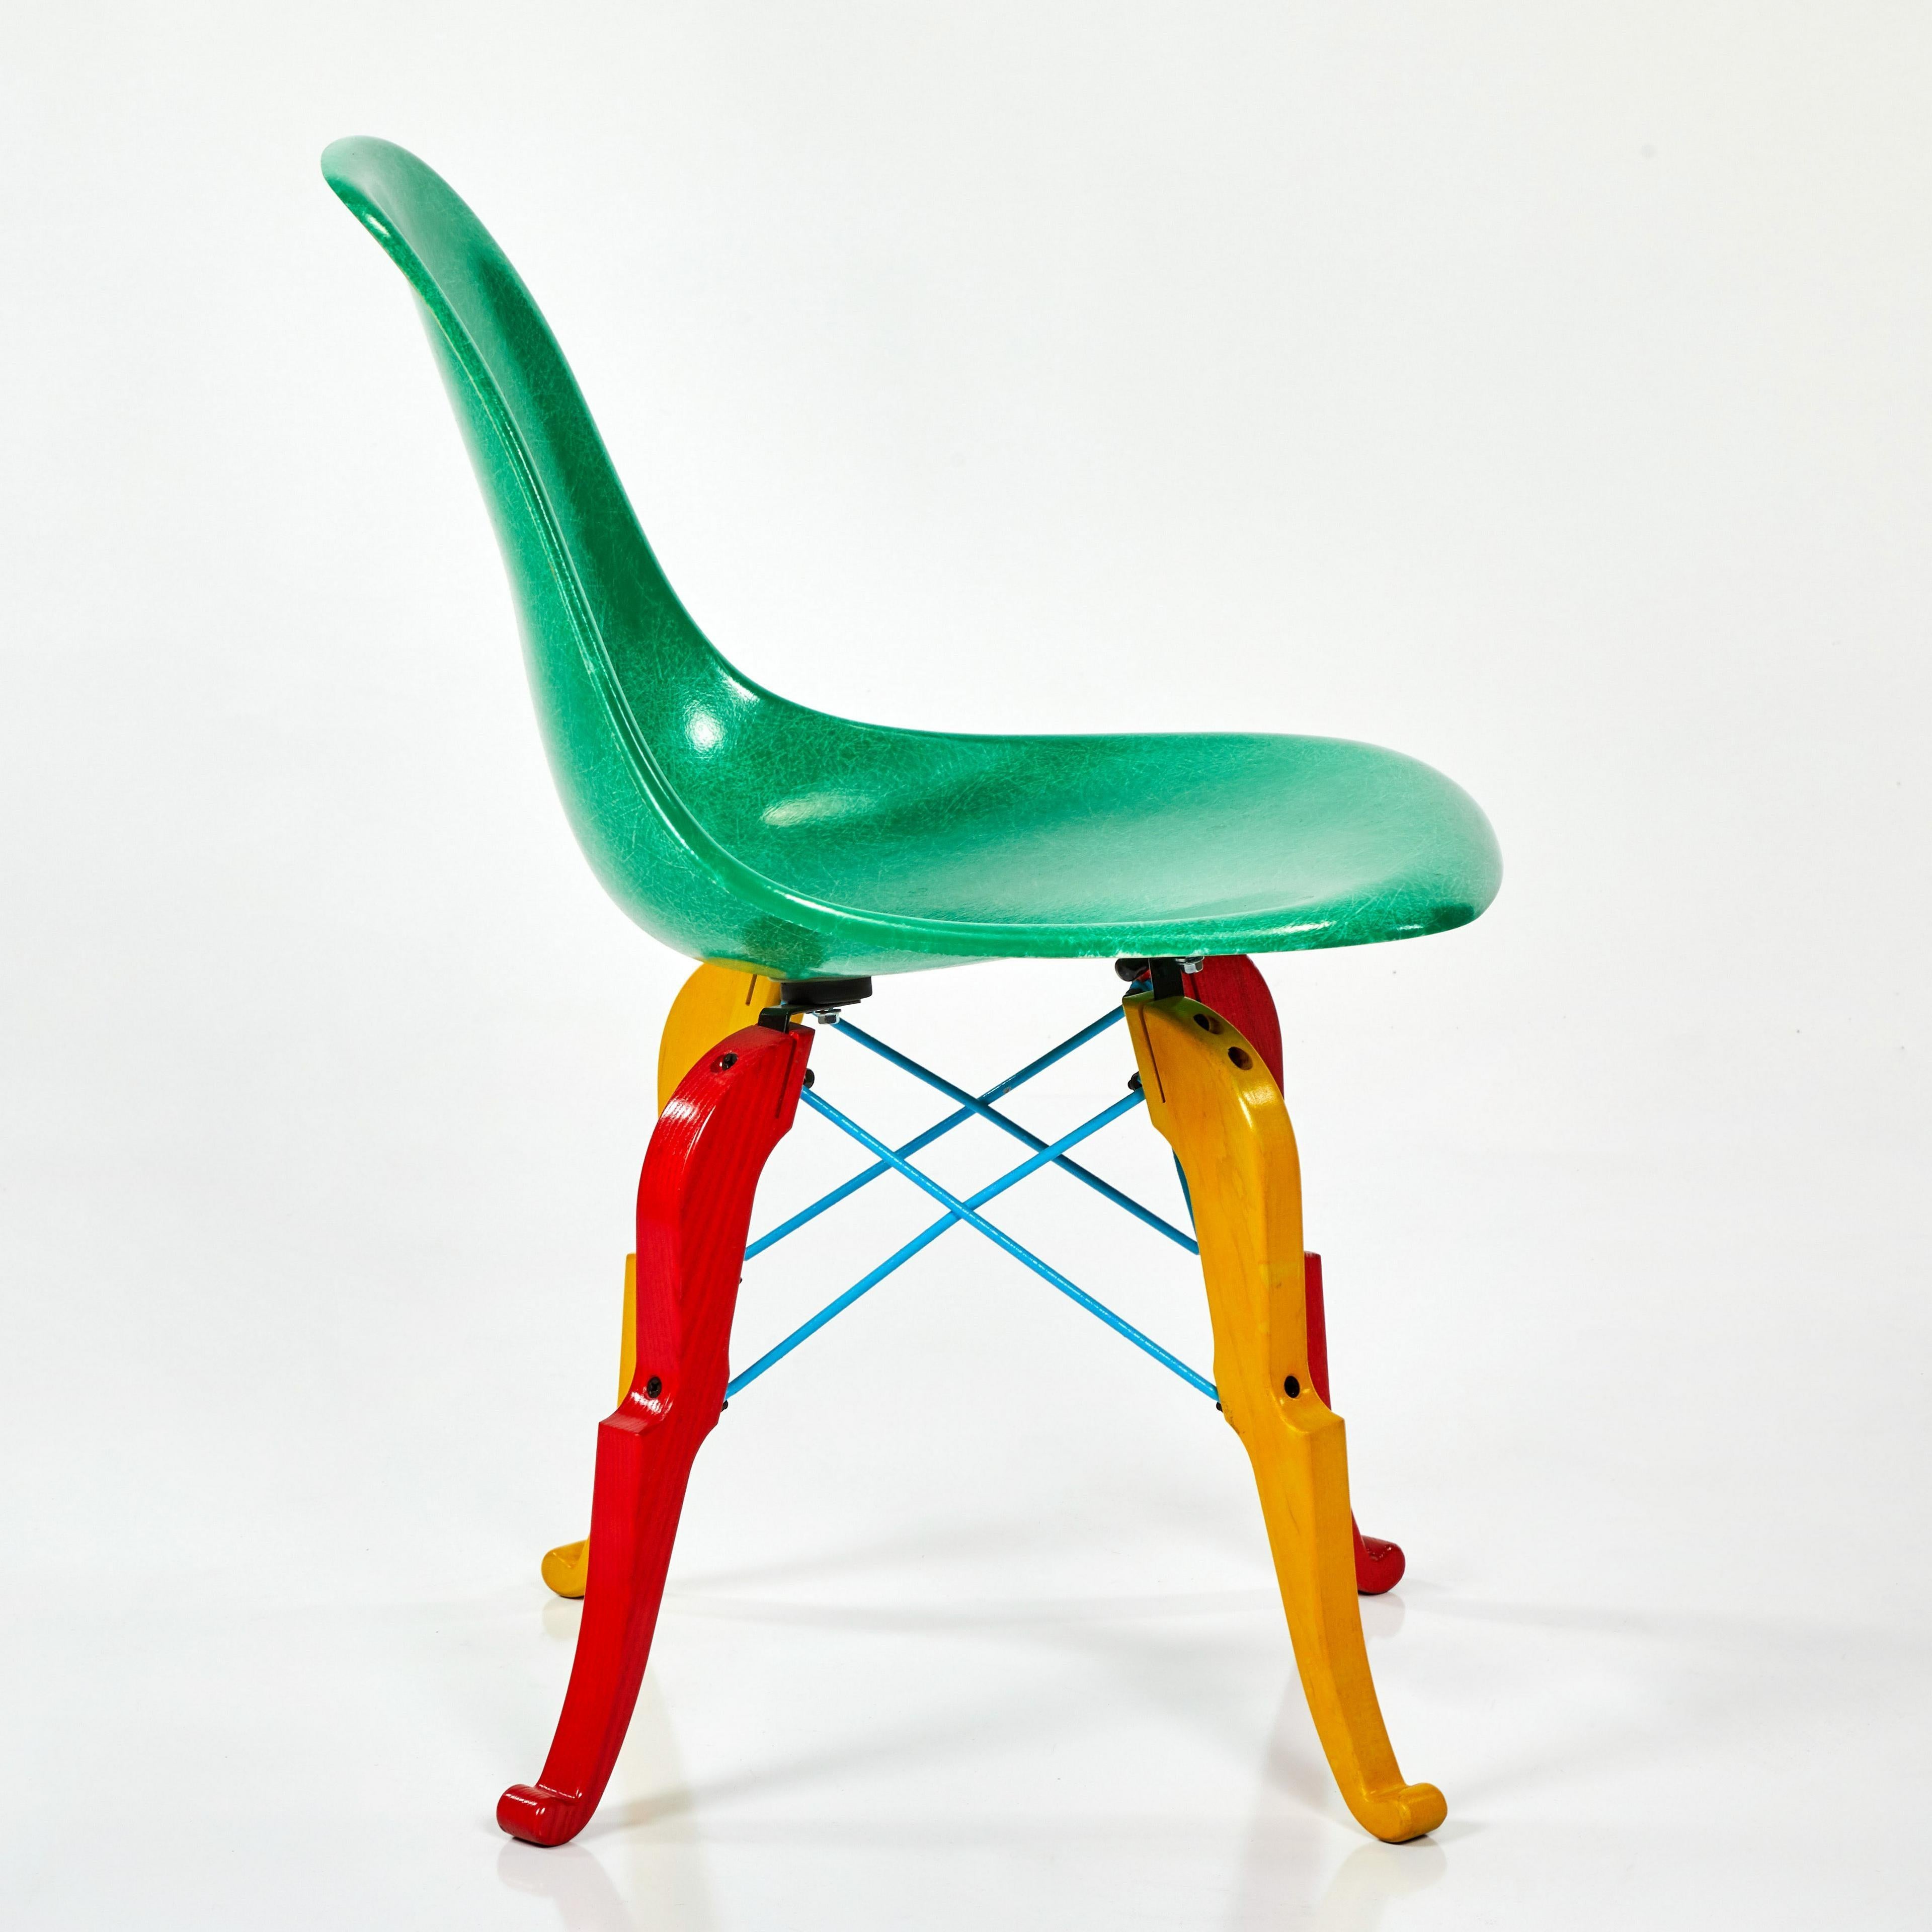 Beautiful and unique take on an Eames-style side chair produced by Modernica and designed by Peter Shire. Produced as an edition of 100 and each is hand-painted by Shire; green fiberglass seat, 'Prince Charles' base in yellow & red paint, blue